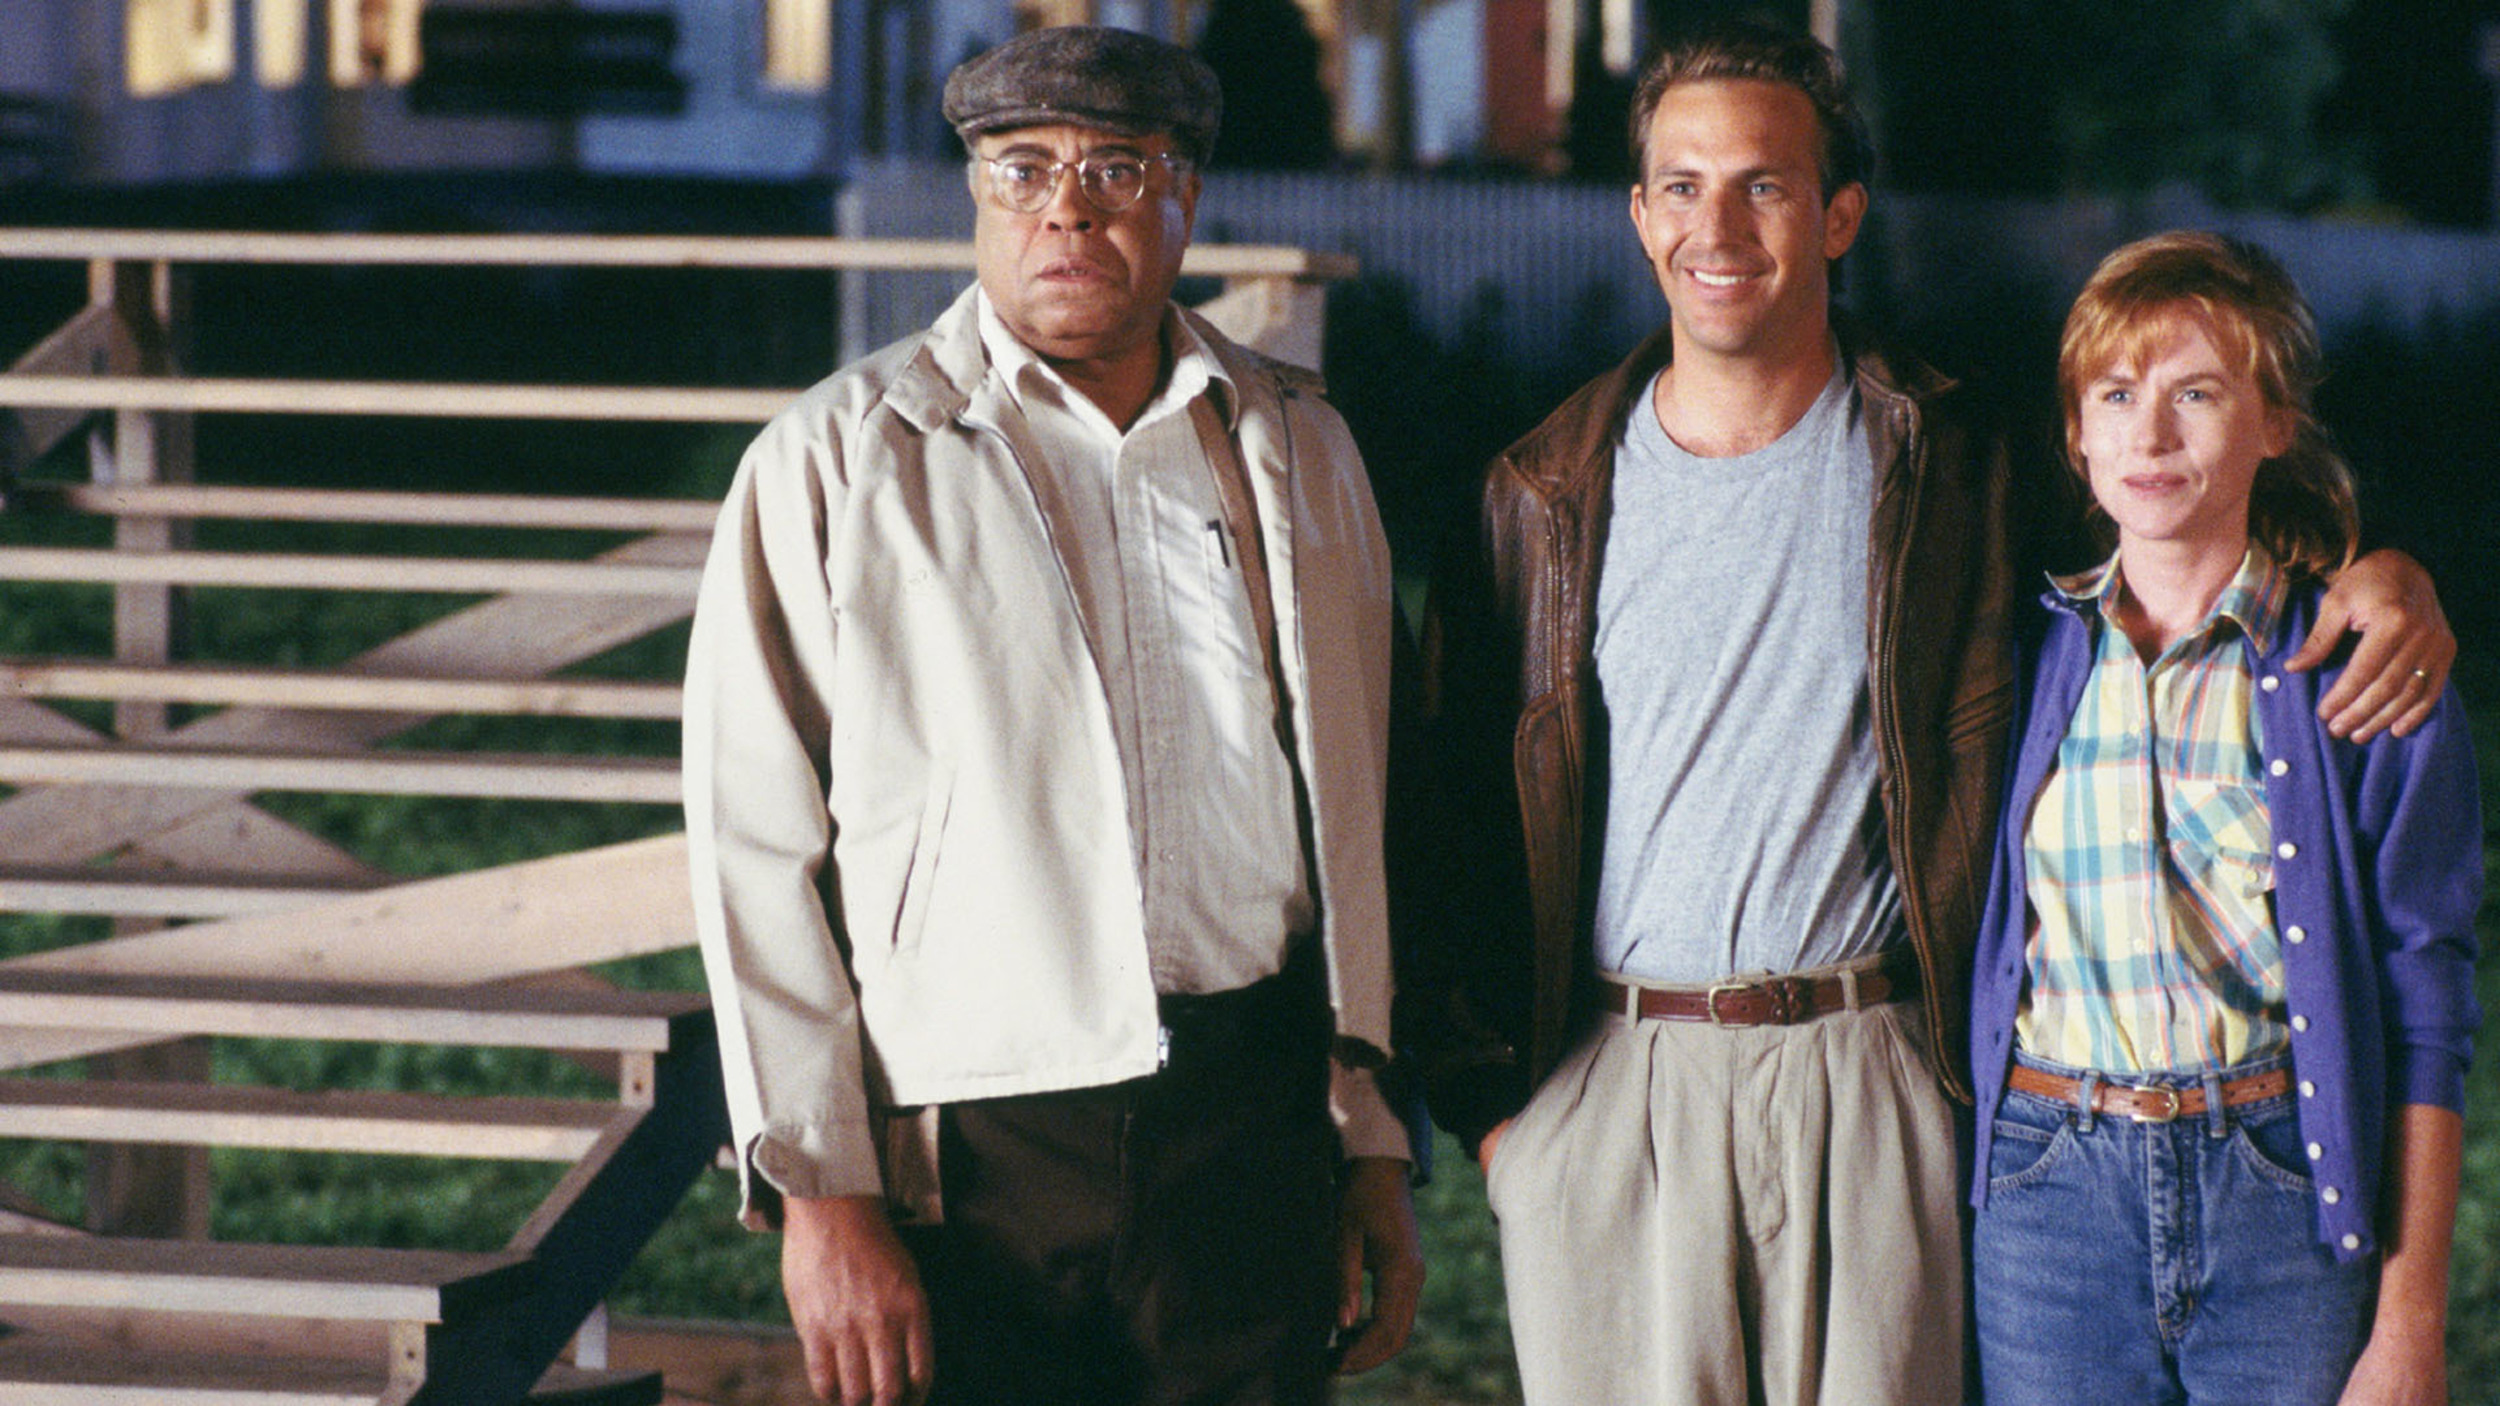 <p>Some will call it corny. Some will call it cheesy. And yet, “Field of Dreams” has an enduring legacy. Clearly, the movie resonates with many people. Plus, it gave us one of the most famous lines in the history of film, sports or otherwise: “If you build it, he will come.”</p><p>You may also like: <a href='https://www.yardbarker.com/nfl/articles/the_worst_trades_in_nfl_history_030724/s1__31595927'>The worst trades in NFL history</a></p>